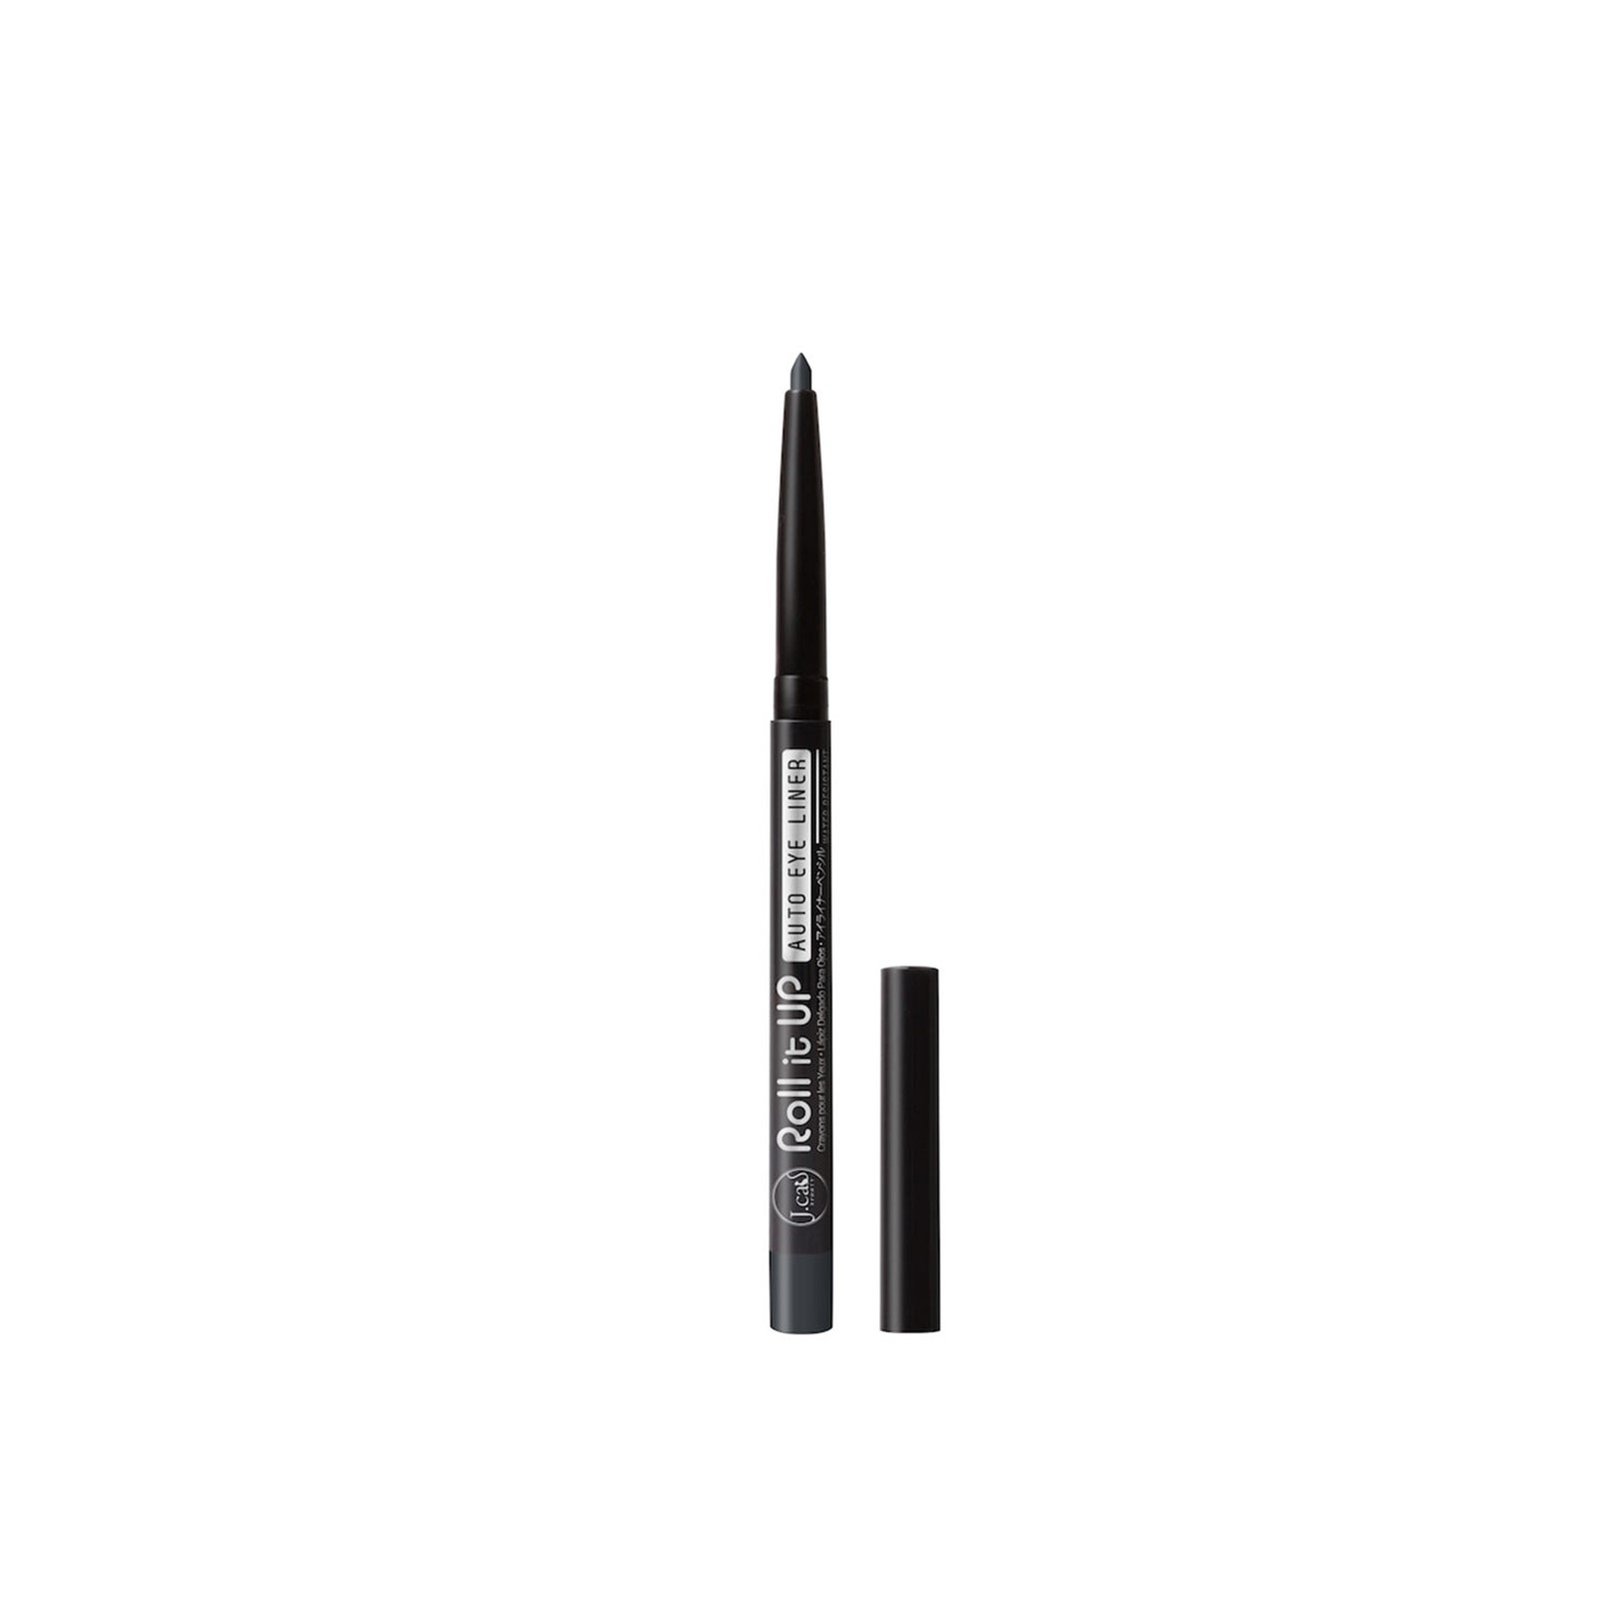 J.Cat Roll It Up Auto Eyeliner 112 Charcoal Grey 0.3g